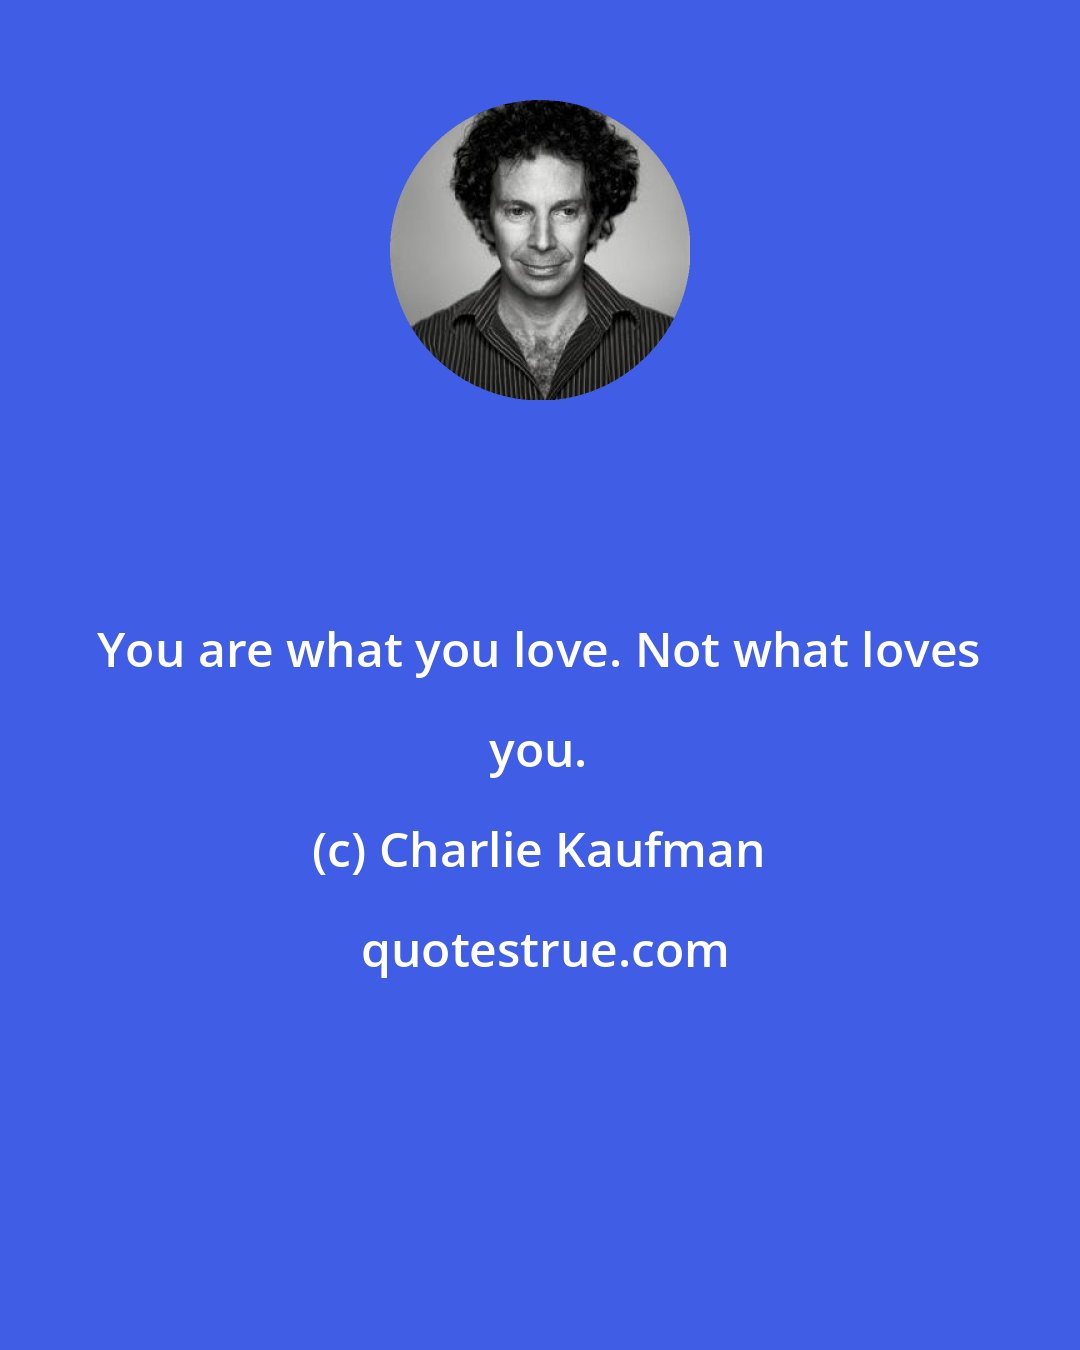 Charlie Kaufman: You are what you love. Not what loves you.